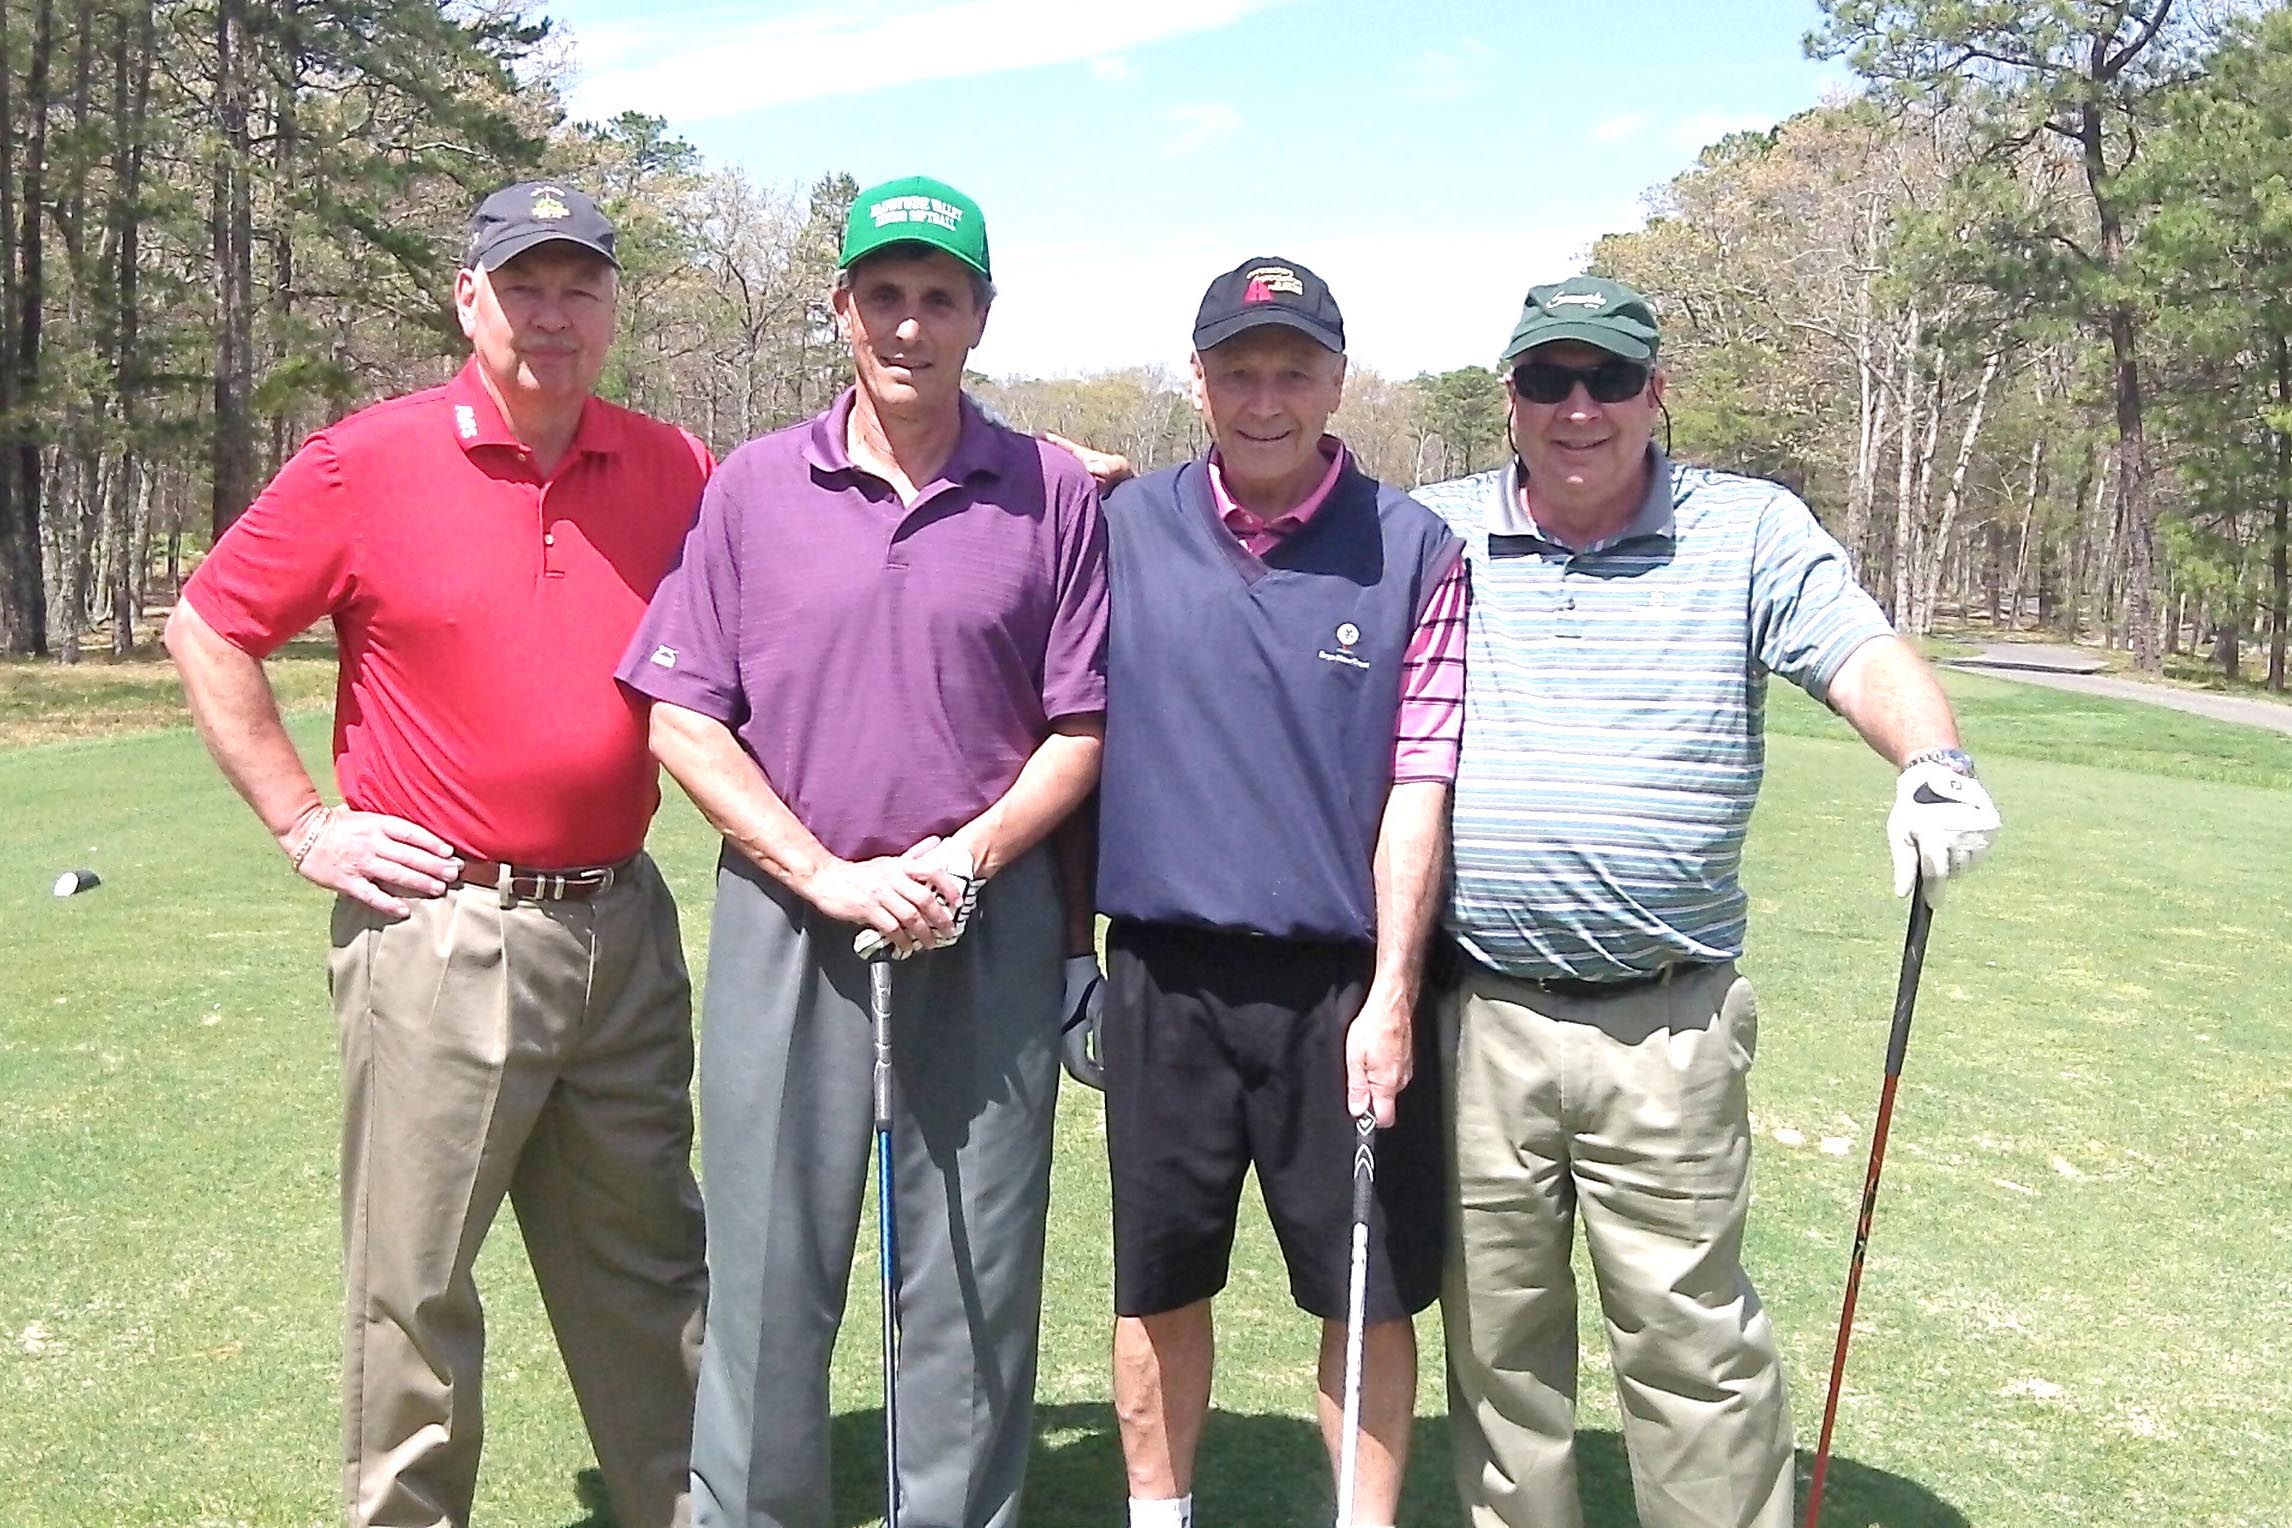  L to R: Gregory Schlegel, Michael Dalesio, Thomas Raymond and Randal Betz at the 2014 Theta Chi Golf Open, May 2, 2014 